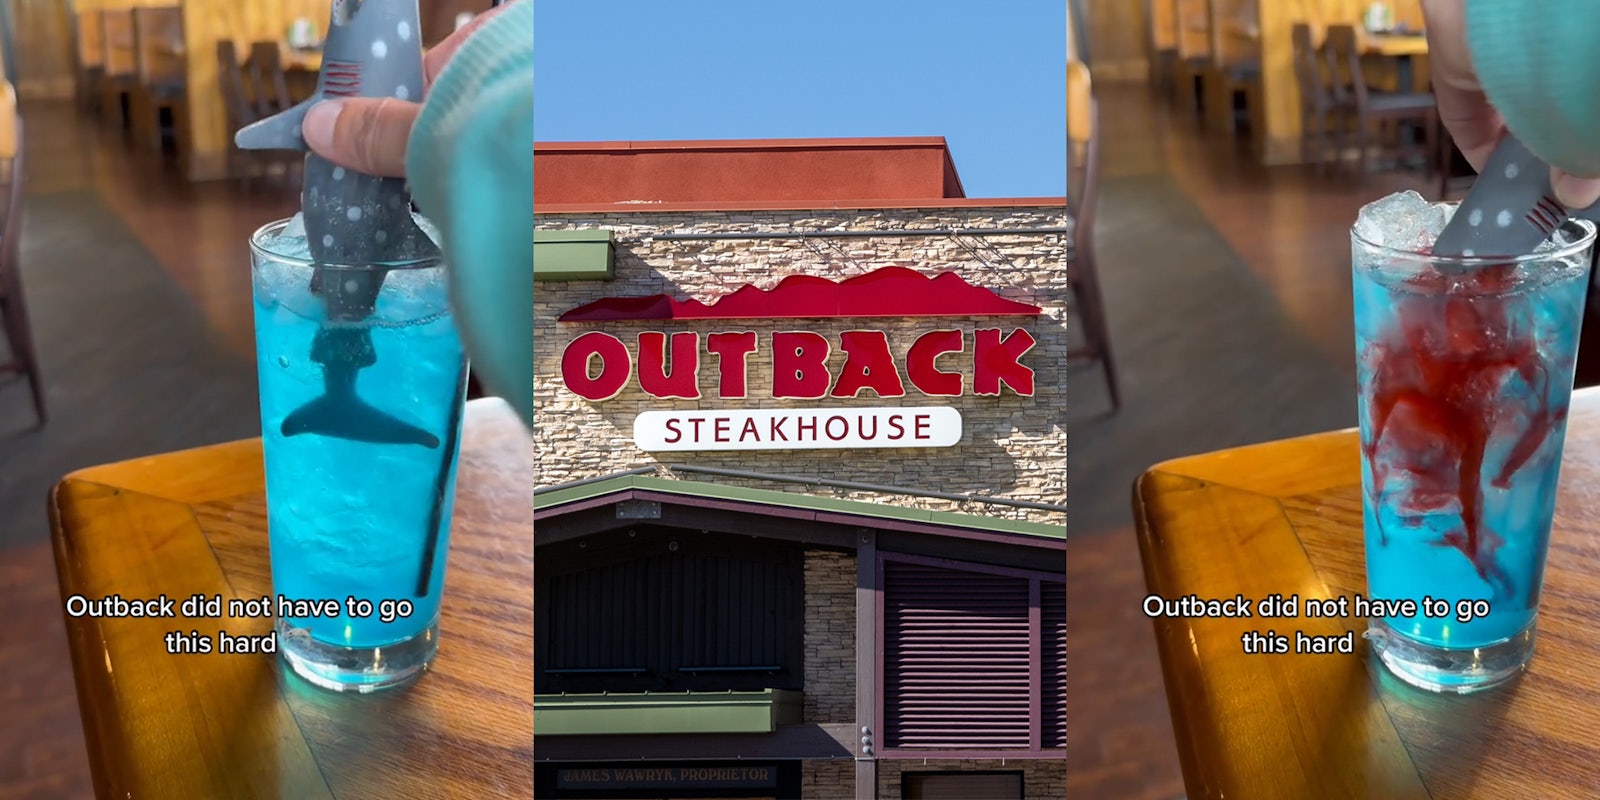 drink on table with shark being pulled out by customer with caption 'Outback did not have to go this hard' (l) Outback Steakhouse building with sign (c) drink on table with shark pouring red liquid inside with caption 'Outback did not have to go this hard' (r)